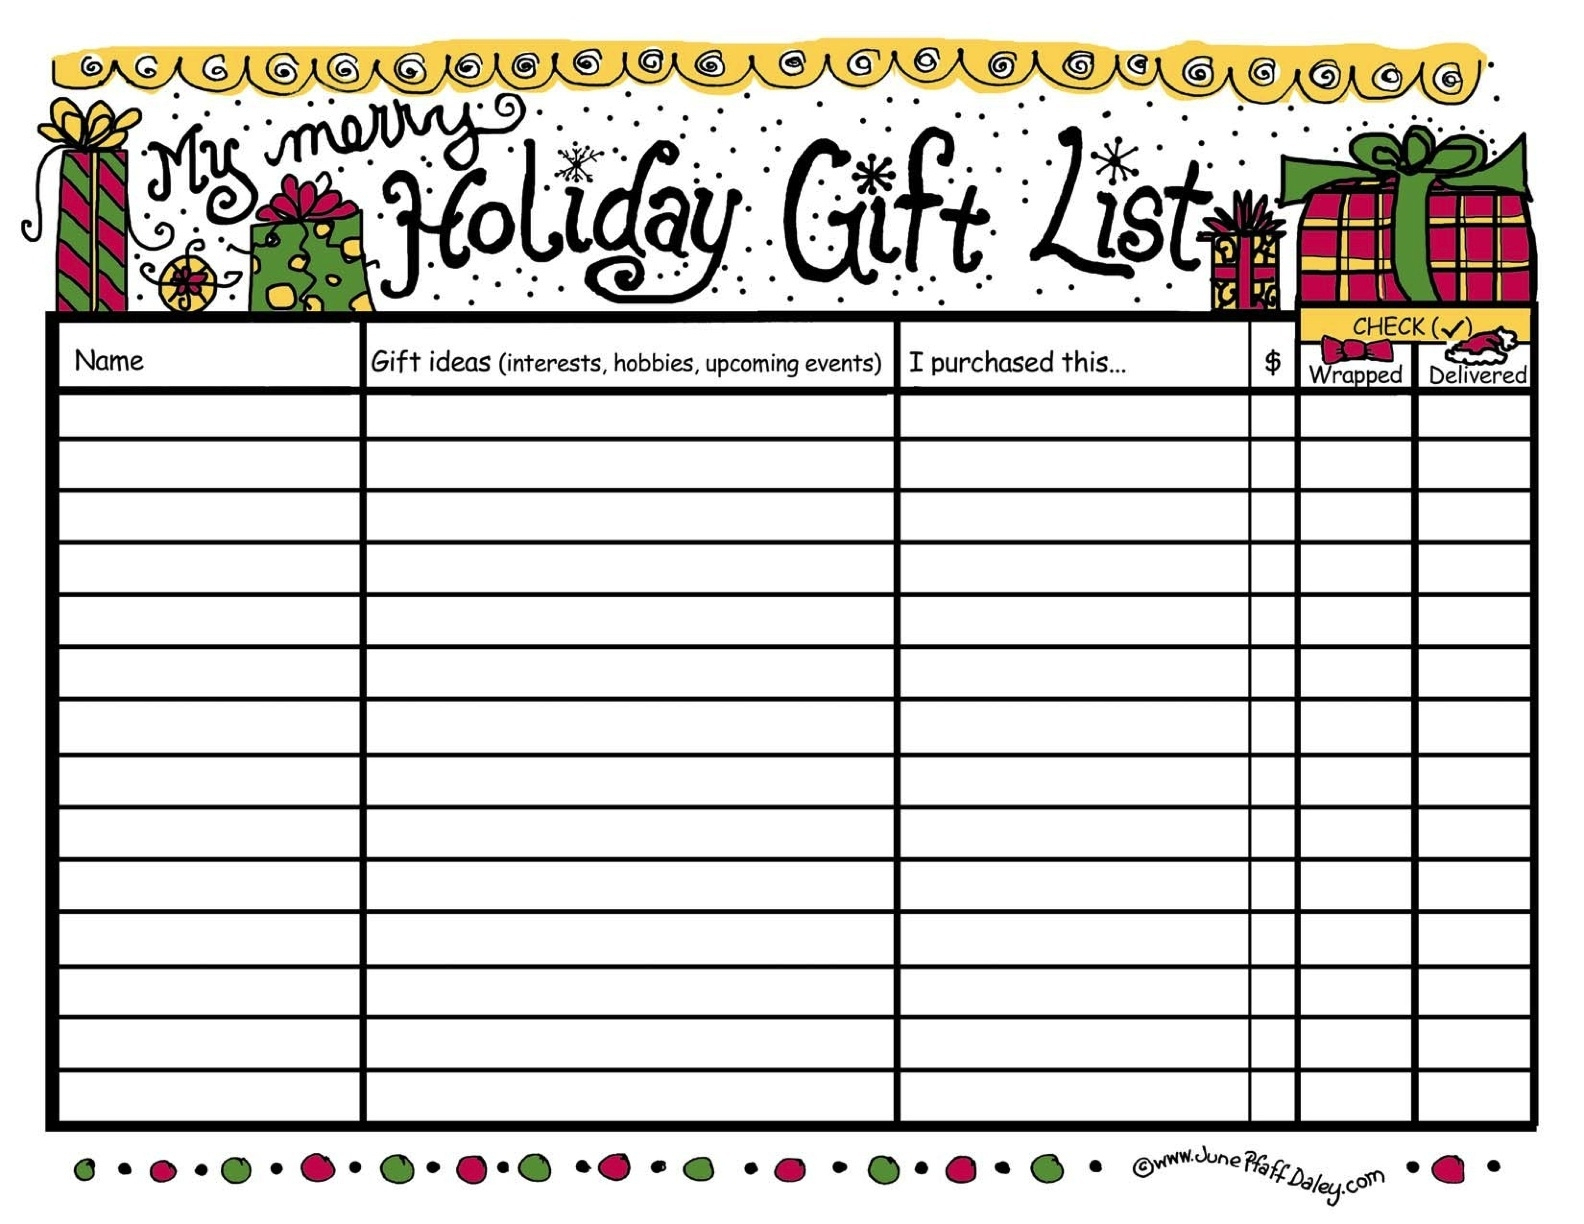 Wish List Maker With Pictures - Bestchristmasdeals - Free Printable Christmas List Maker